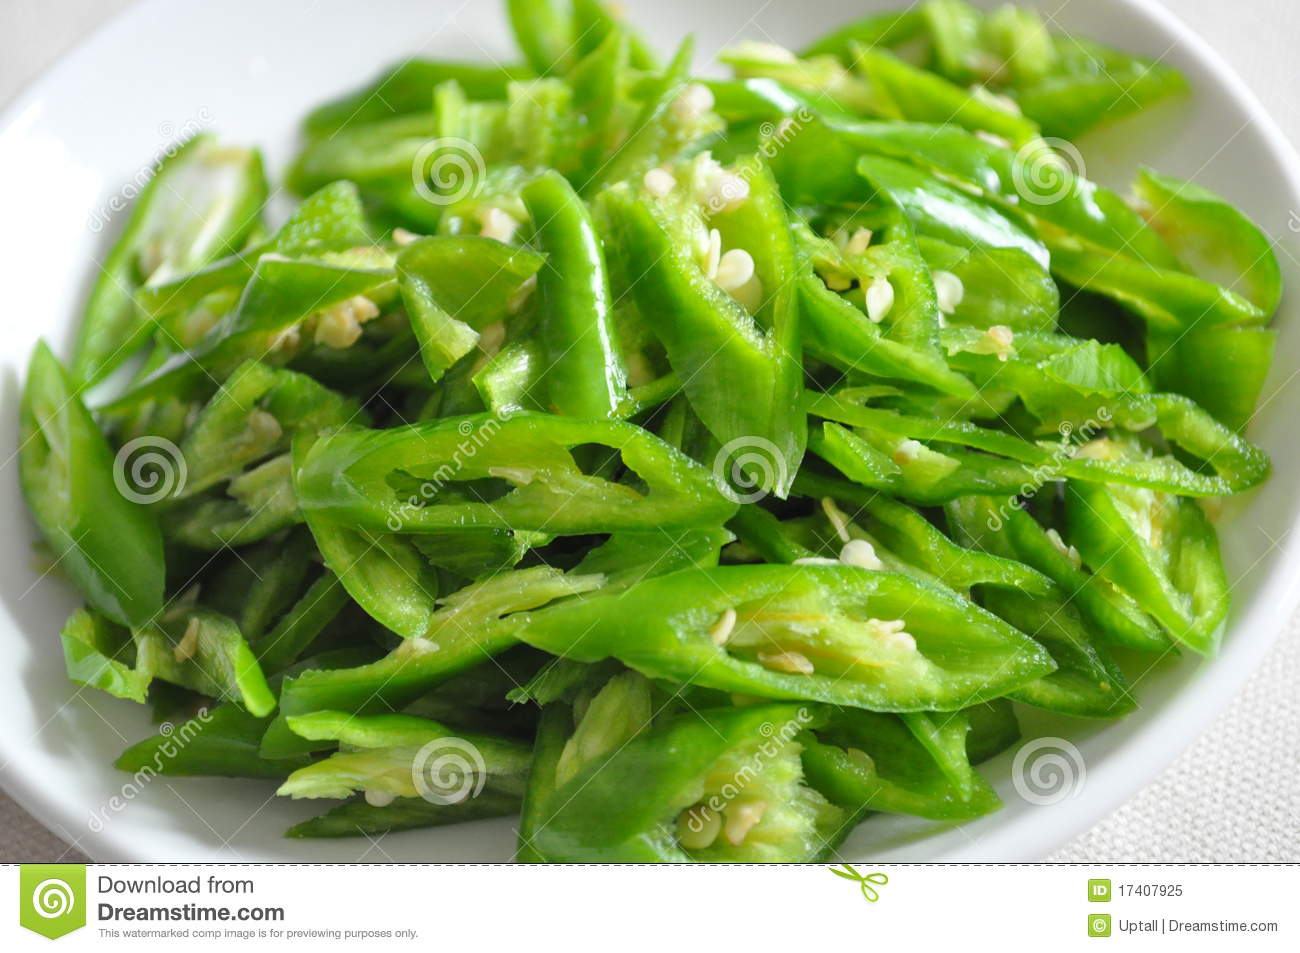 Green Pepper Slice Royalty Free Stock Photo   Image  17407925